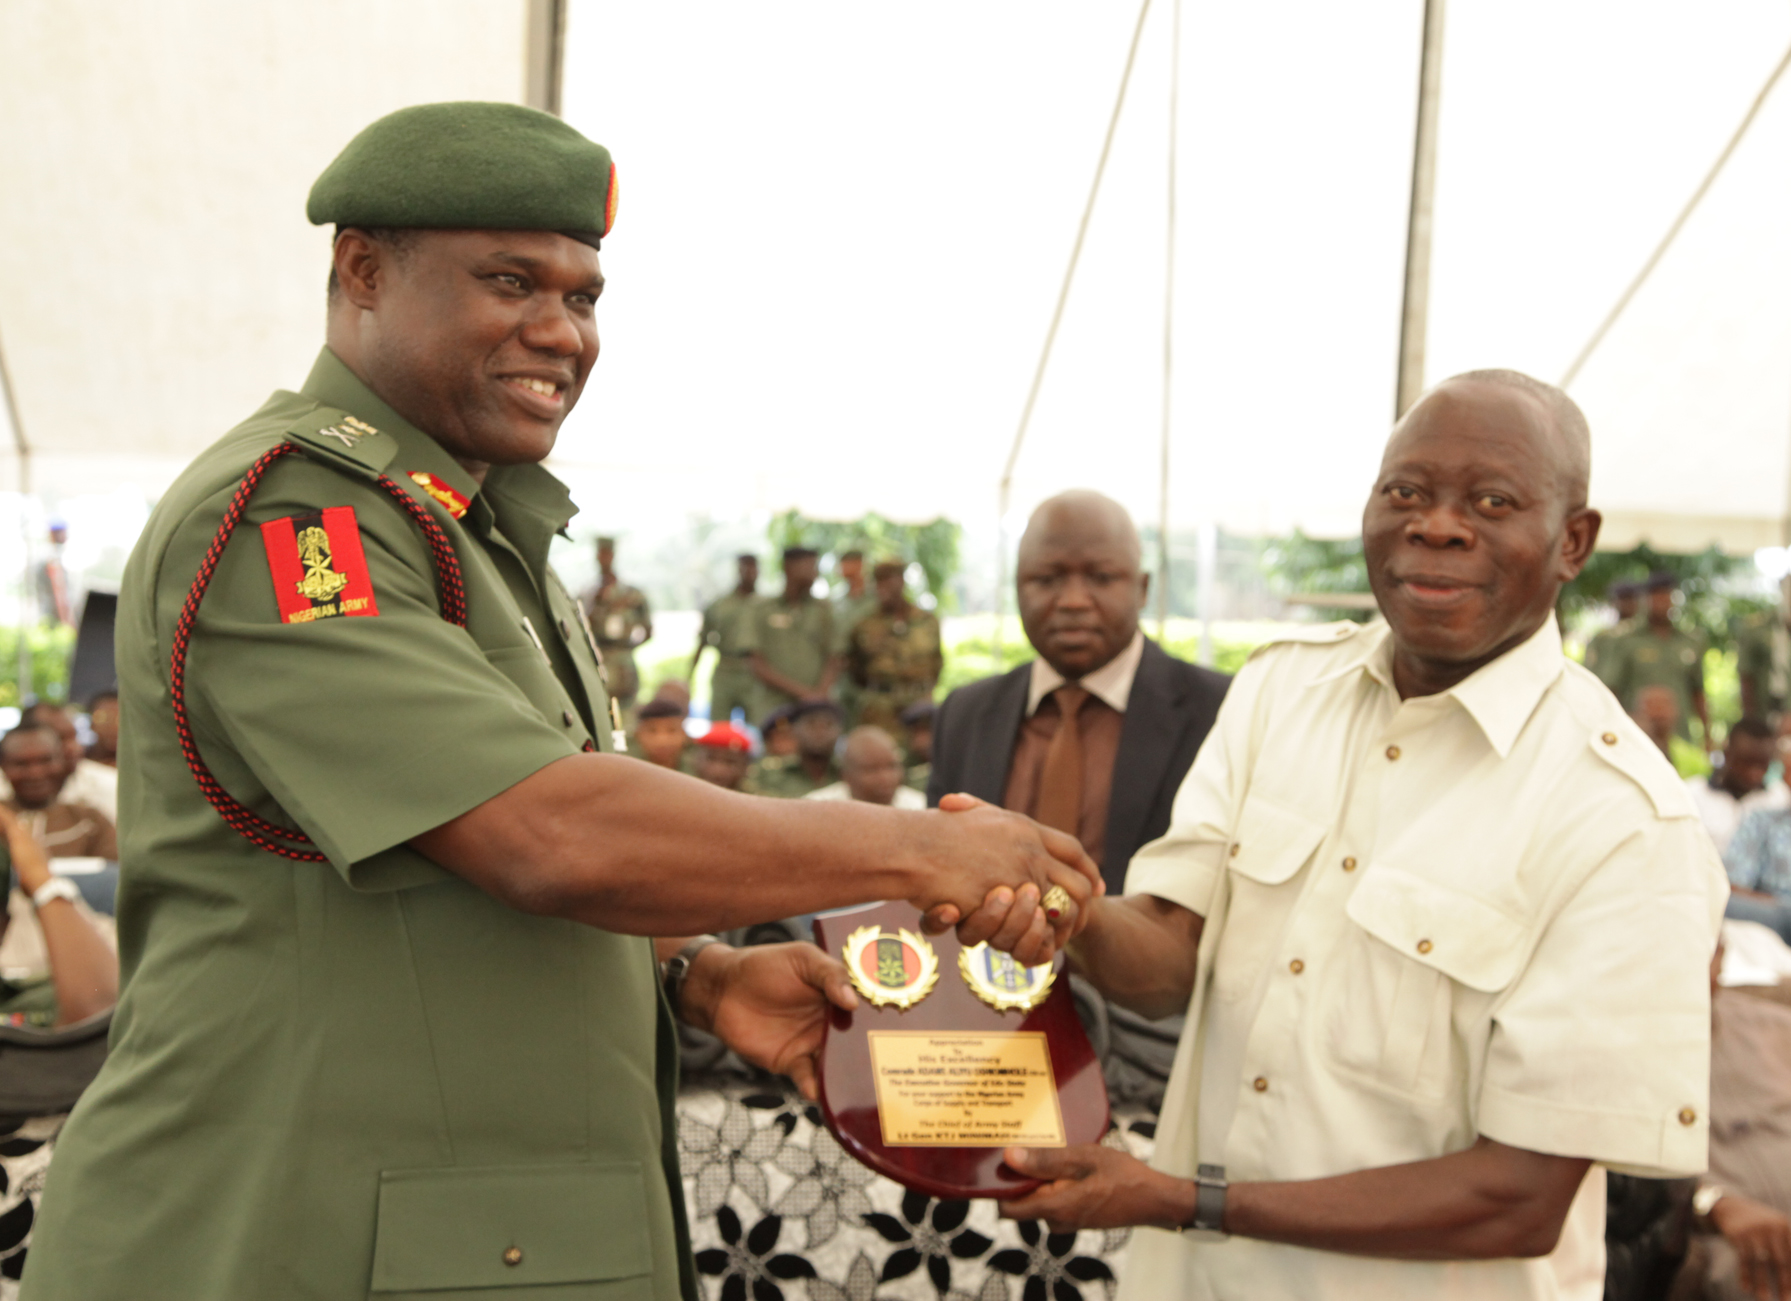 The Chief of Army Staff, Lt-General Kenneth Minimah presents a plaque to Governor Adams Oshiomhole of Edo State during the commissioning of the remodeled Officers' Mess of the Nigerian Army School of Supply and Transport, Benin City, last Friday.